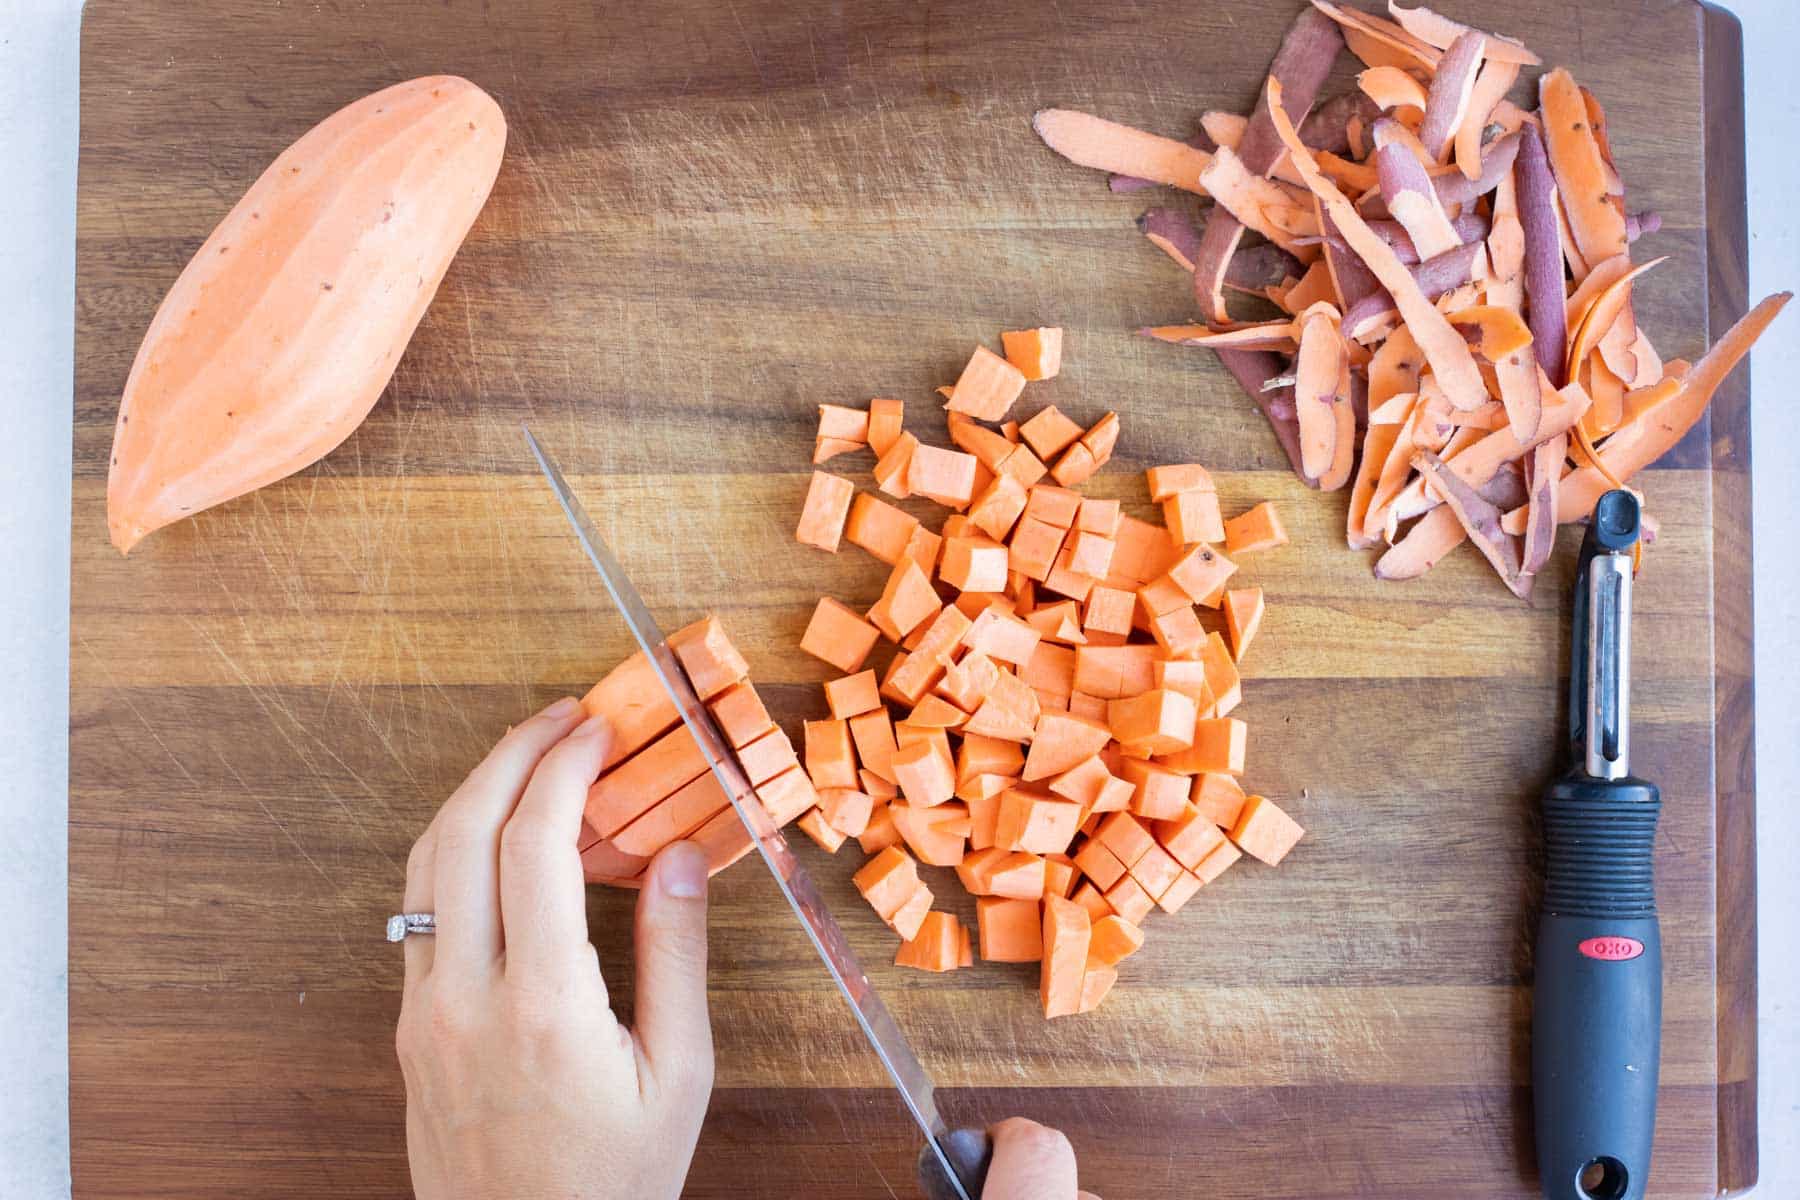 Sweet potato is peeled and diced for this vegetarian dish.